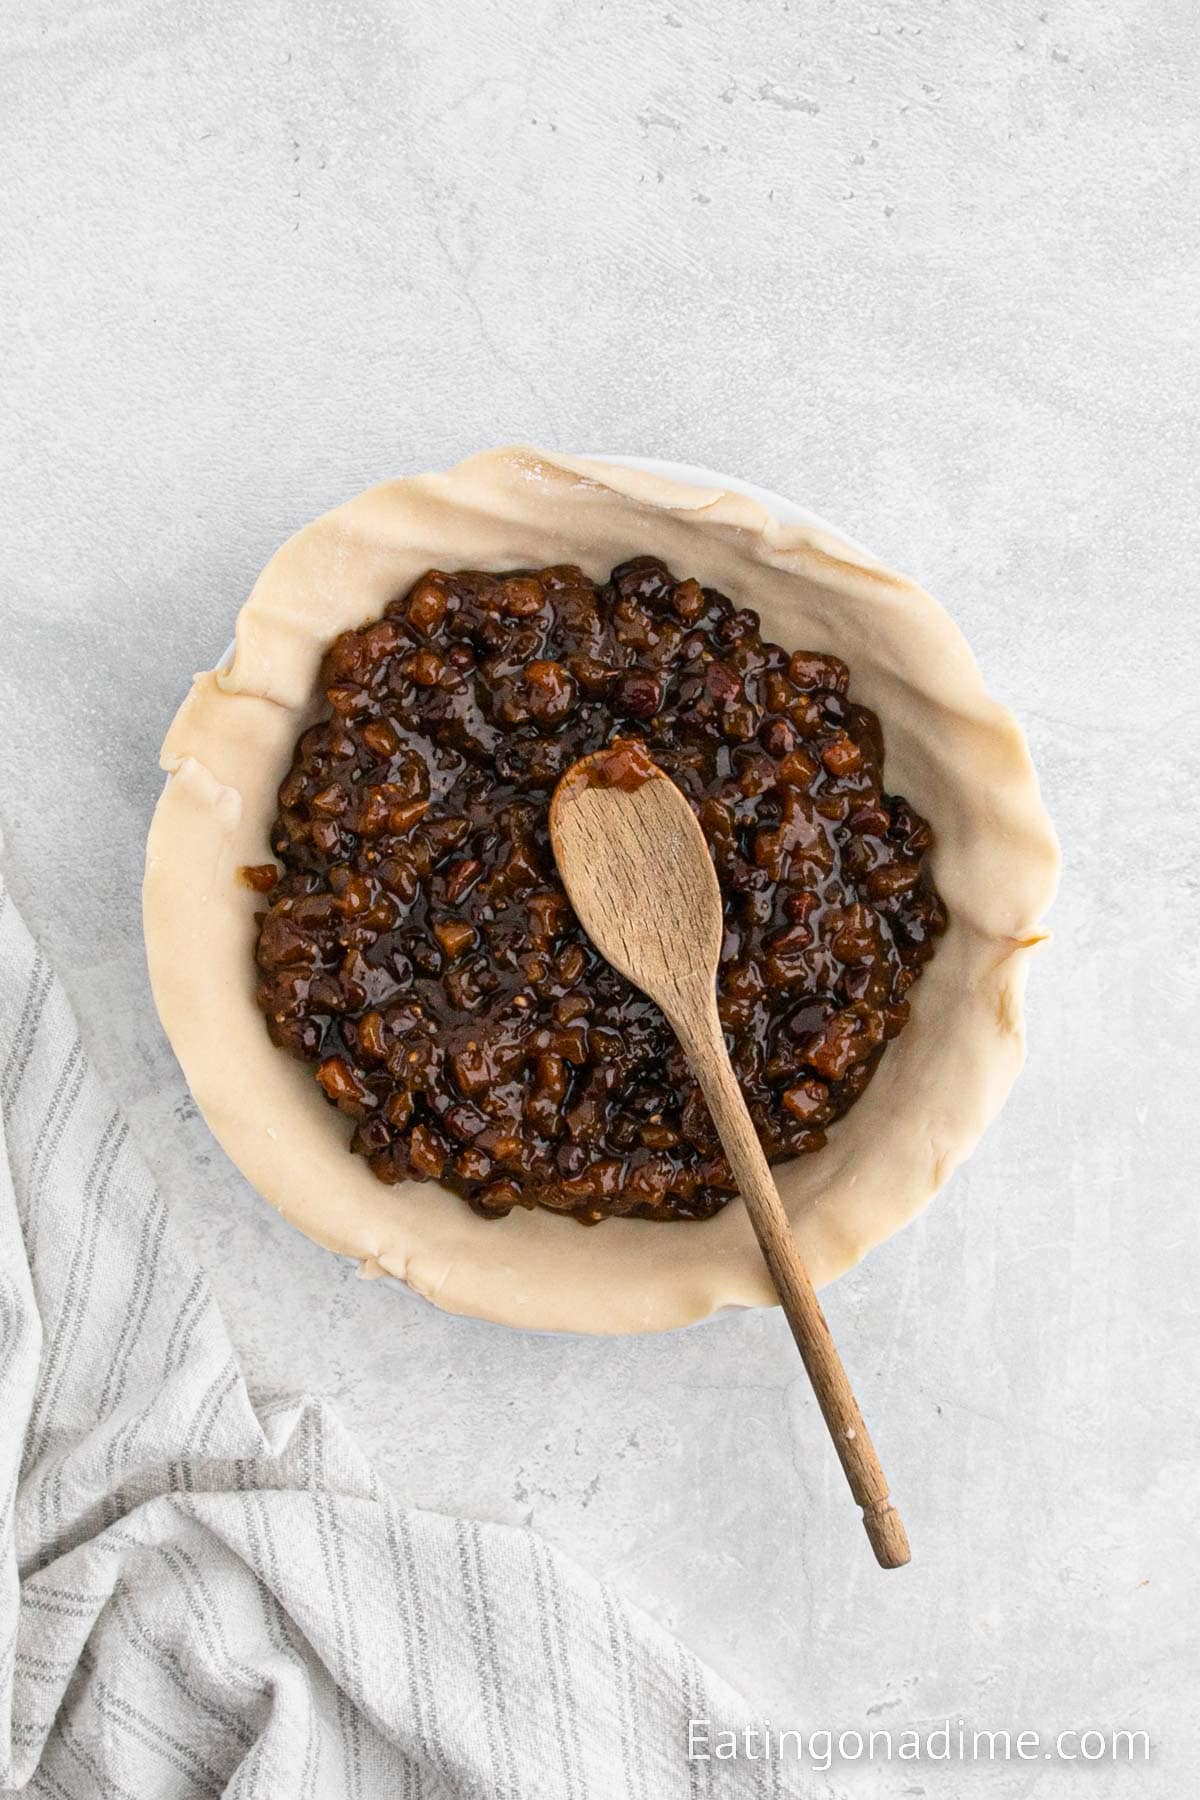 Spreading the mincemeat pie filling into crust